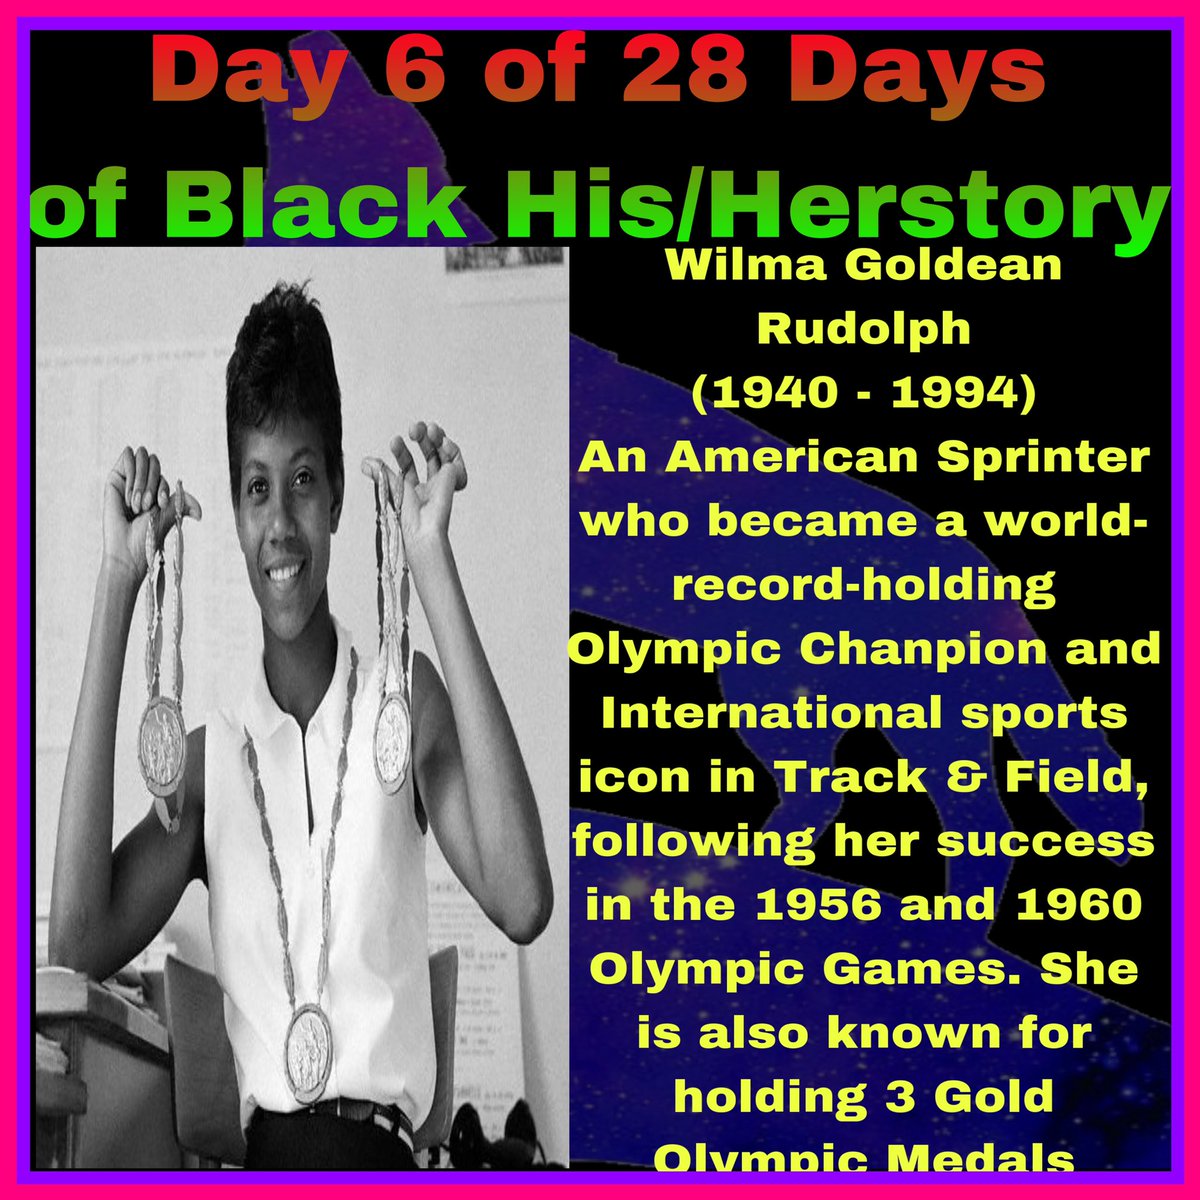 Day 6 of 28 Days of Black His/Herstory Month: Ms Wilma Goldean Rudolph

#TheMoreYouKnow
 #BLM 
#BlackHistoryMonth  
#BlackHerstoryMonth 
#28DaysofBlackHistory
#xSilverrWolf
#STG
#BunniiGang
#KDT